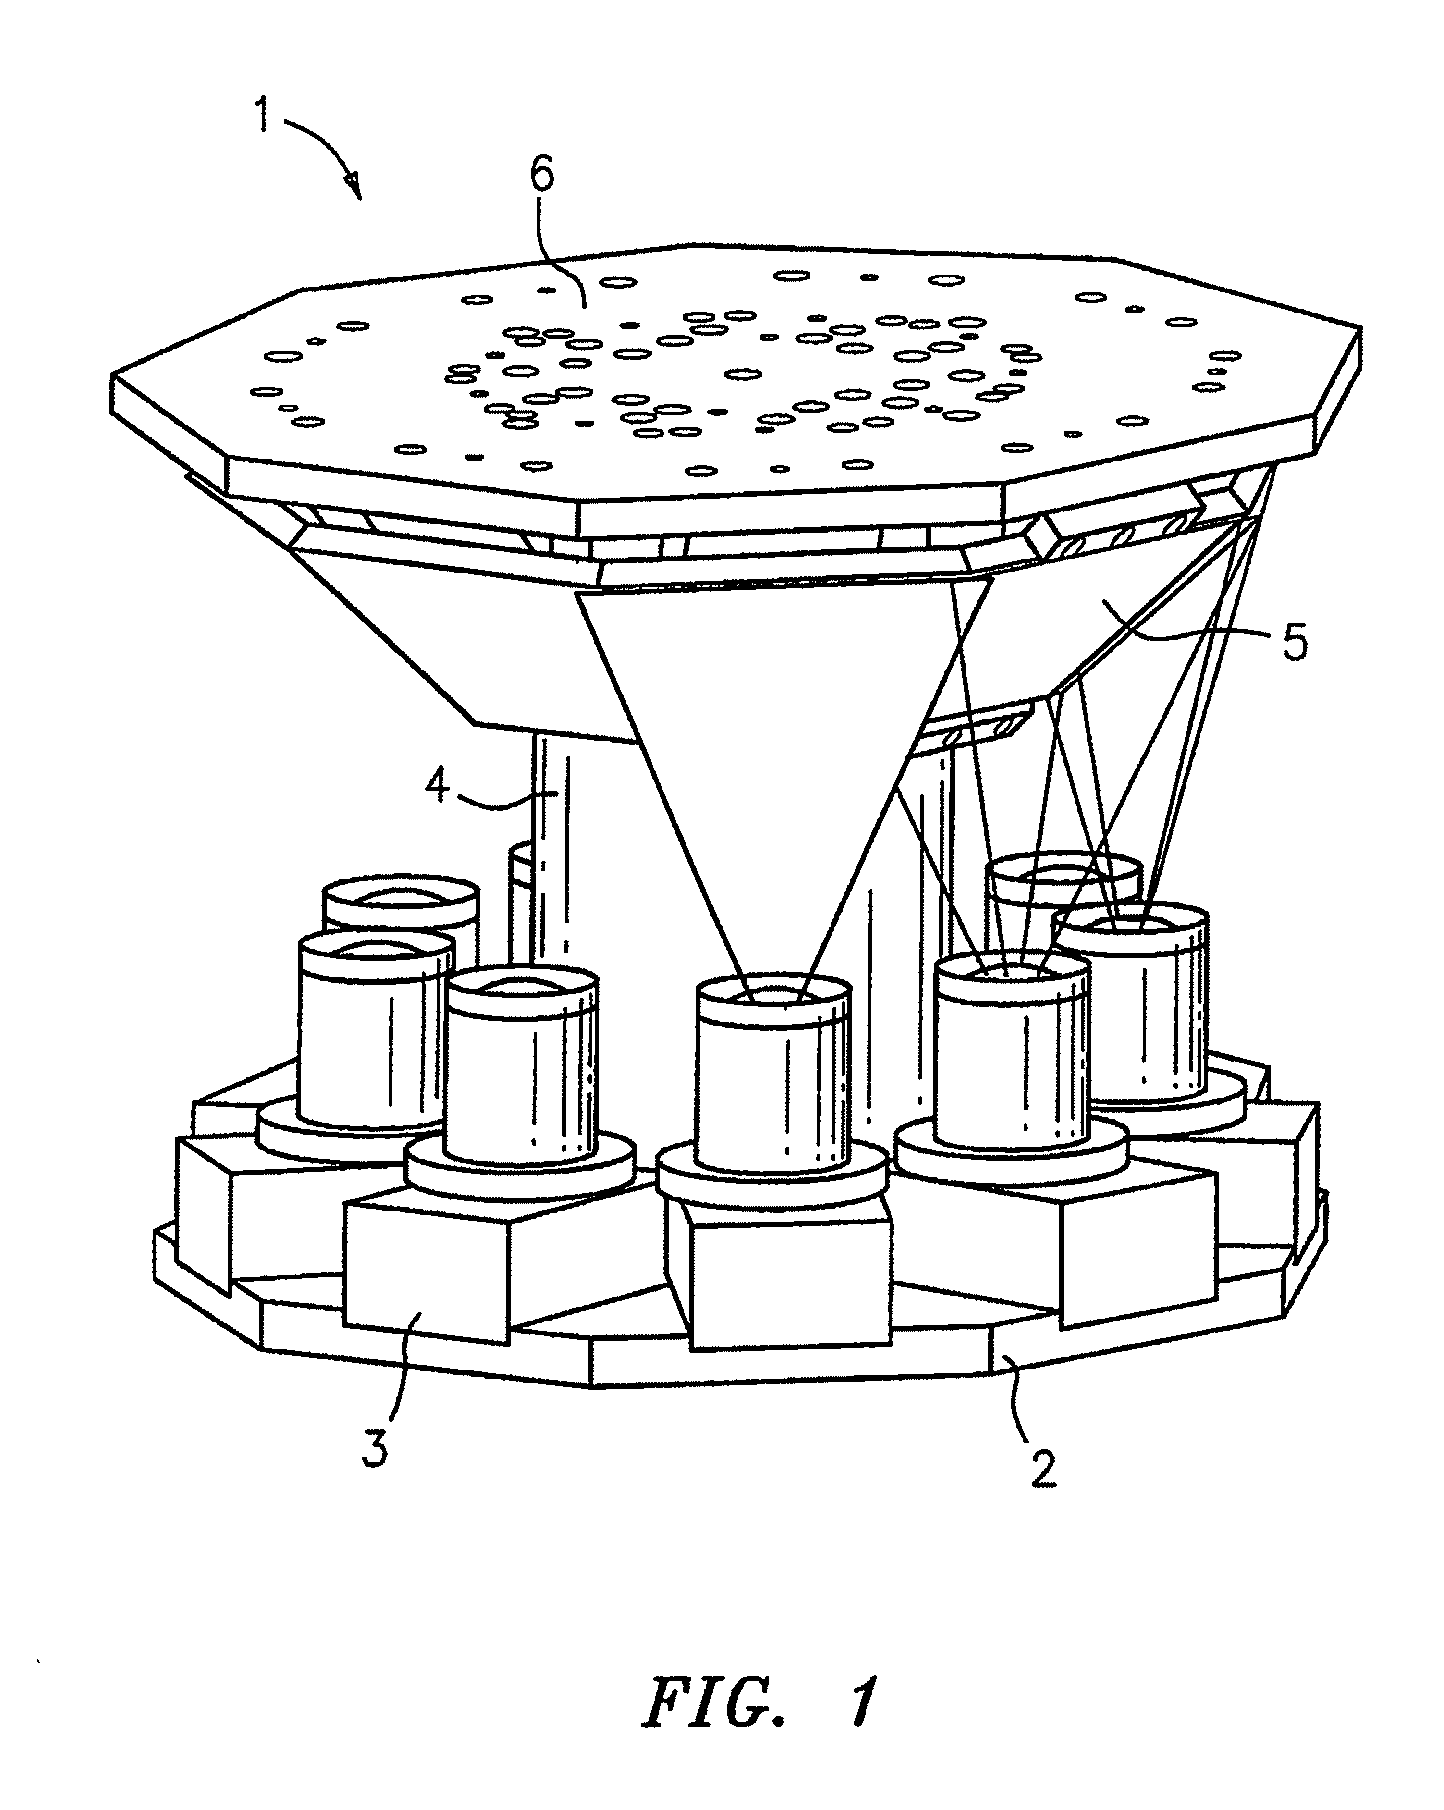 System and method for capturing and displaying cinema quality panoramic images